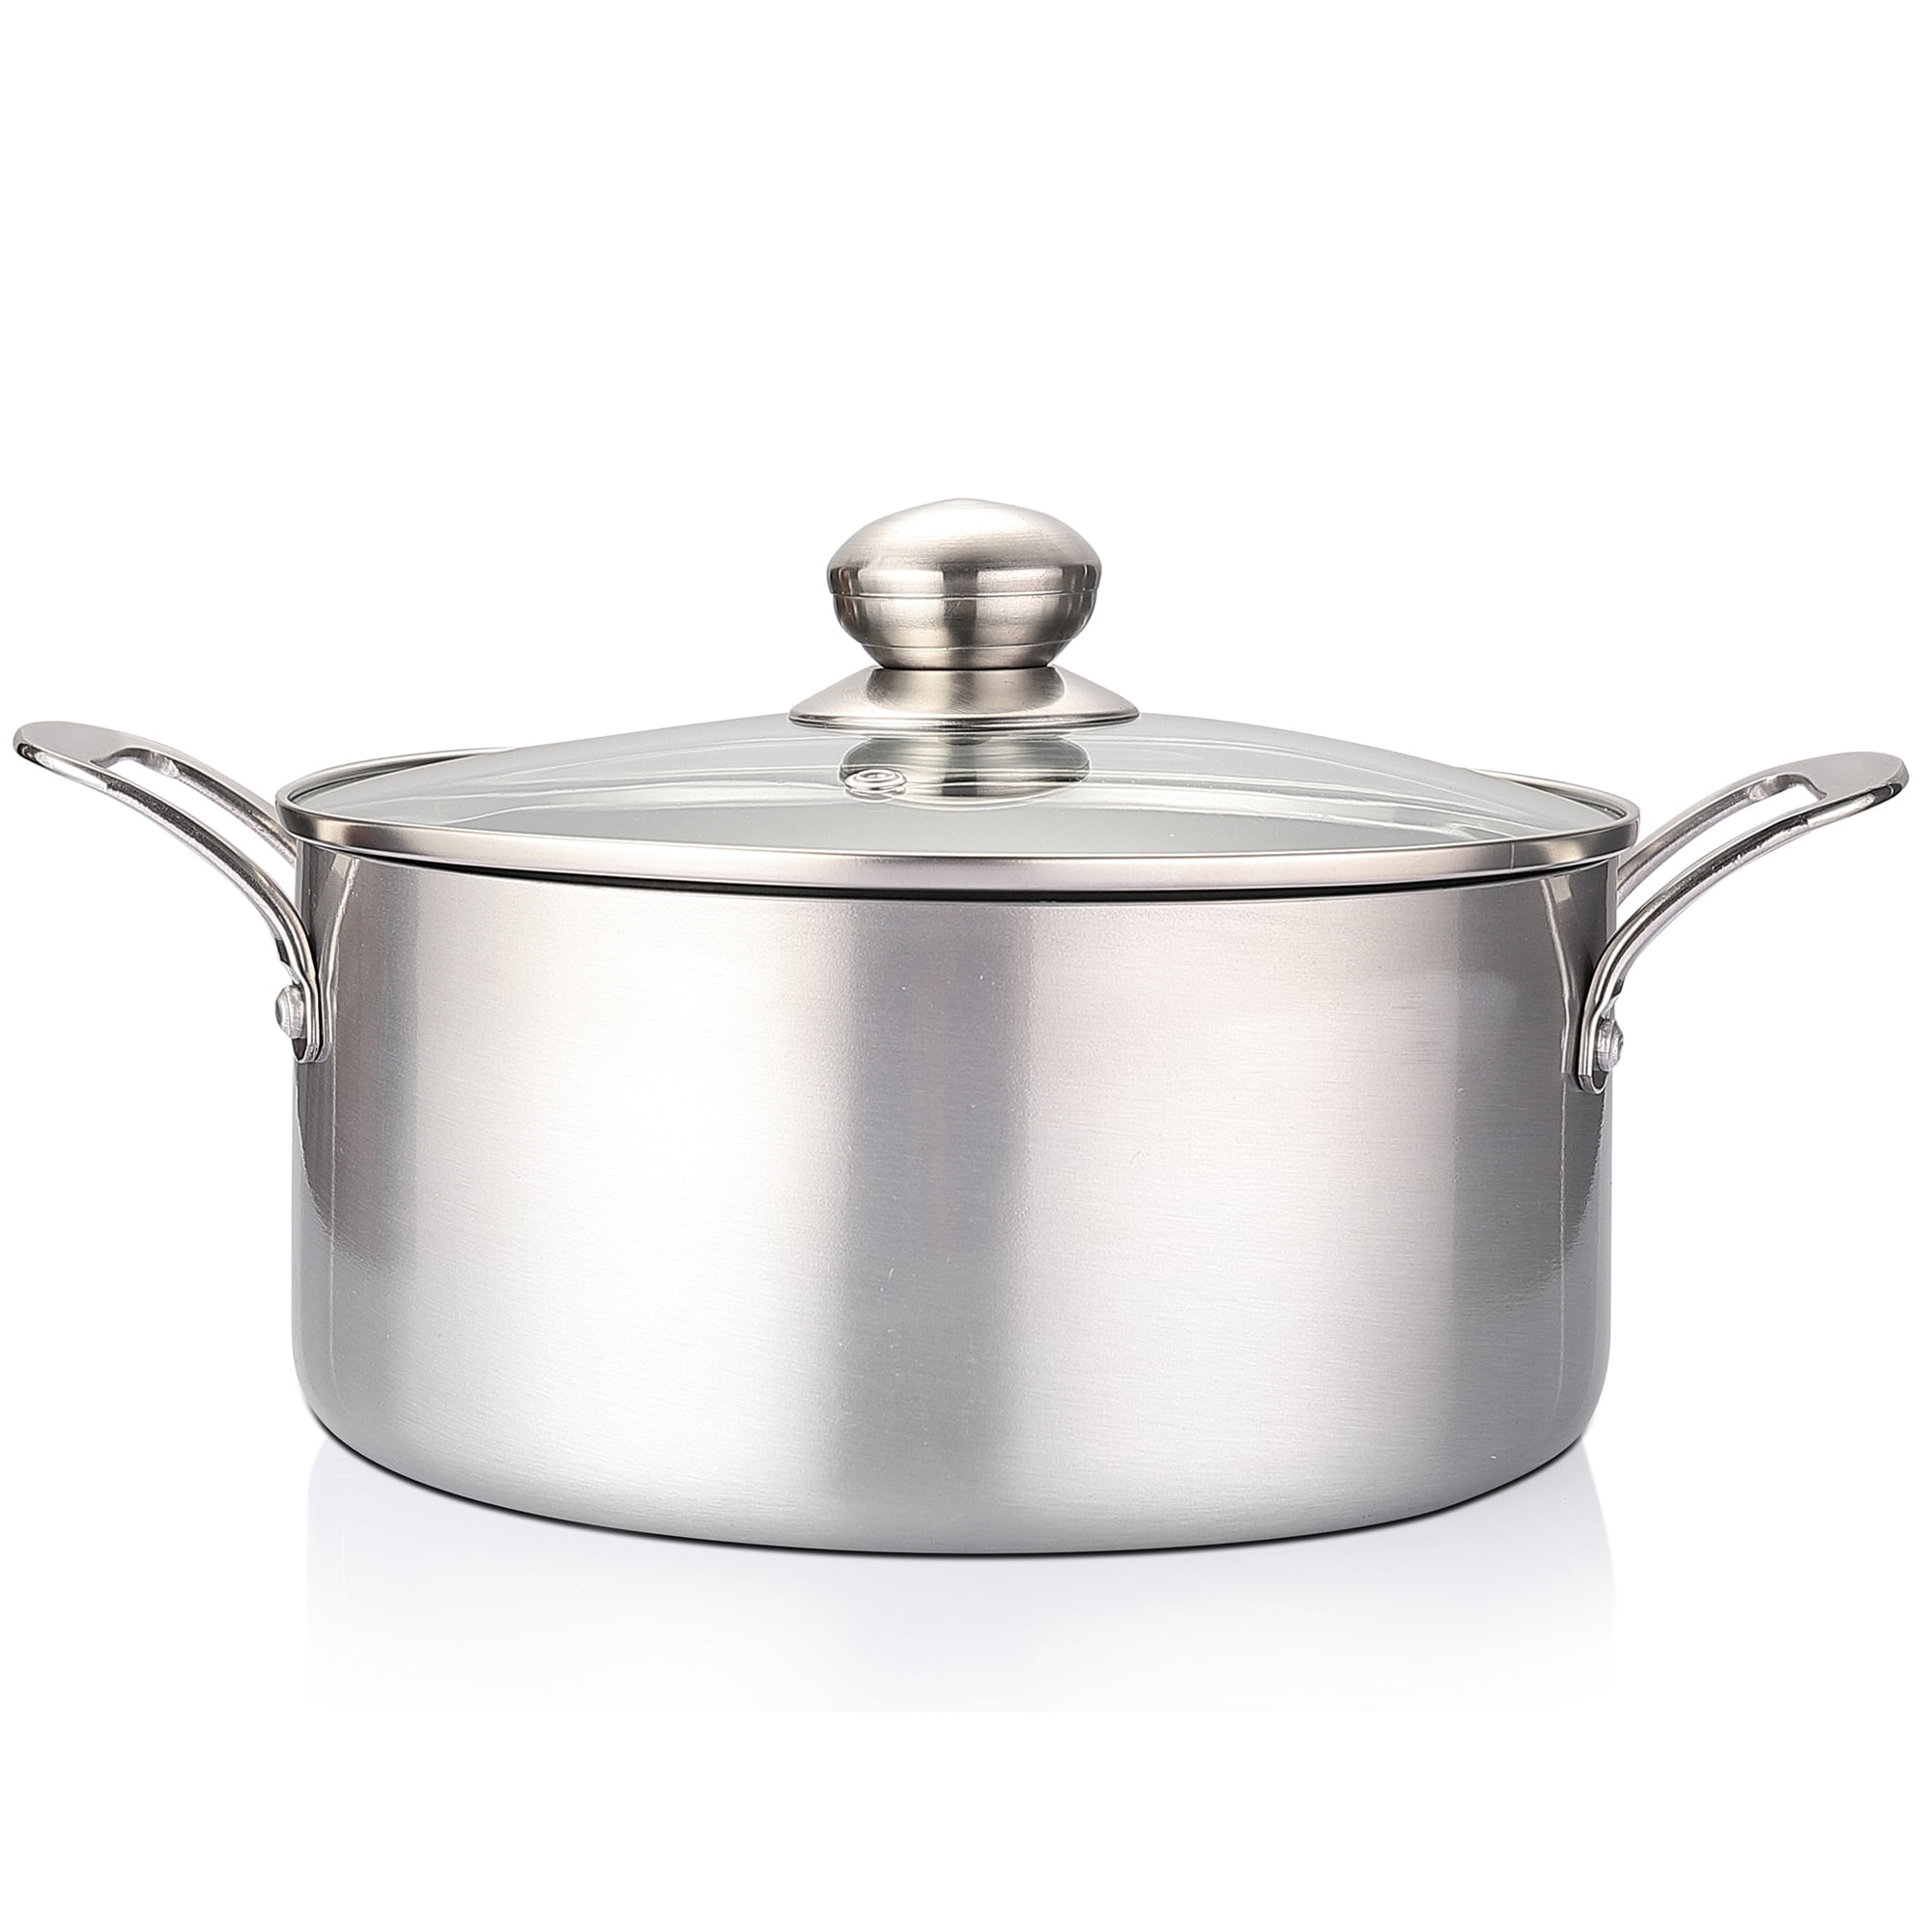 4-quart Stock Pot with Lid in 5-ply Stainless Steel » NUCU